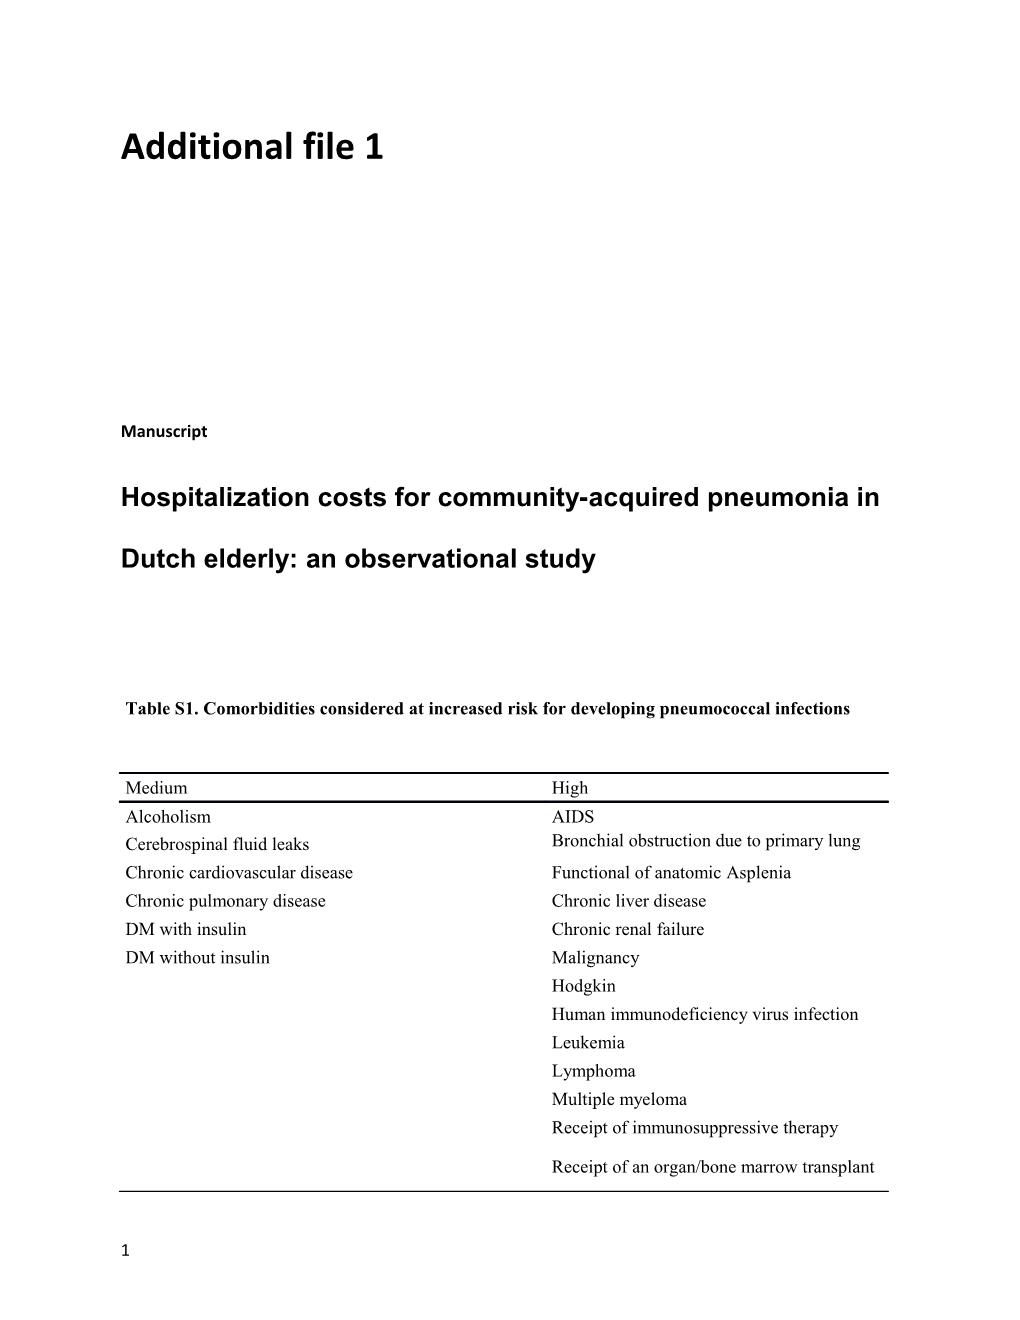 Hospitalization Costs for Community-Acquired Pneumonia in Dutch Elderly: an Observational